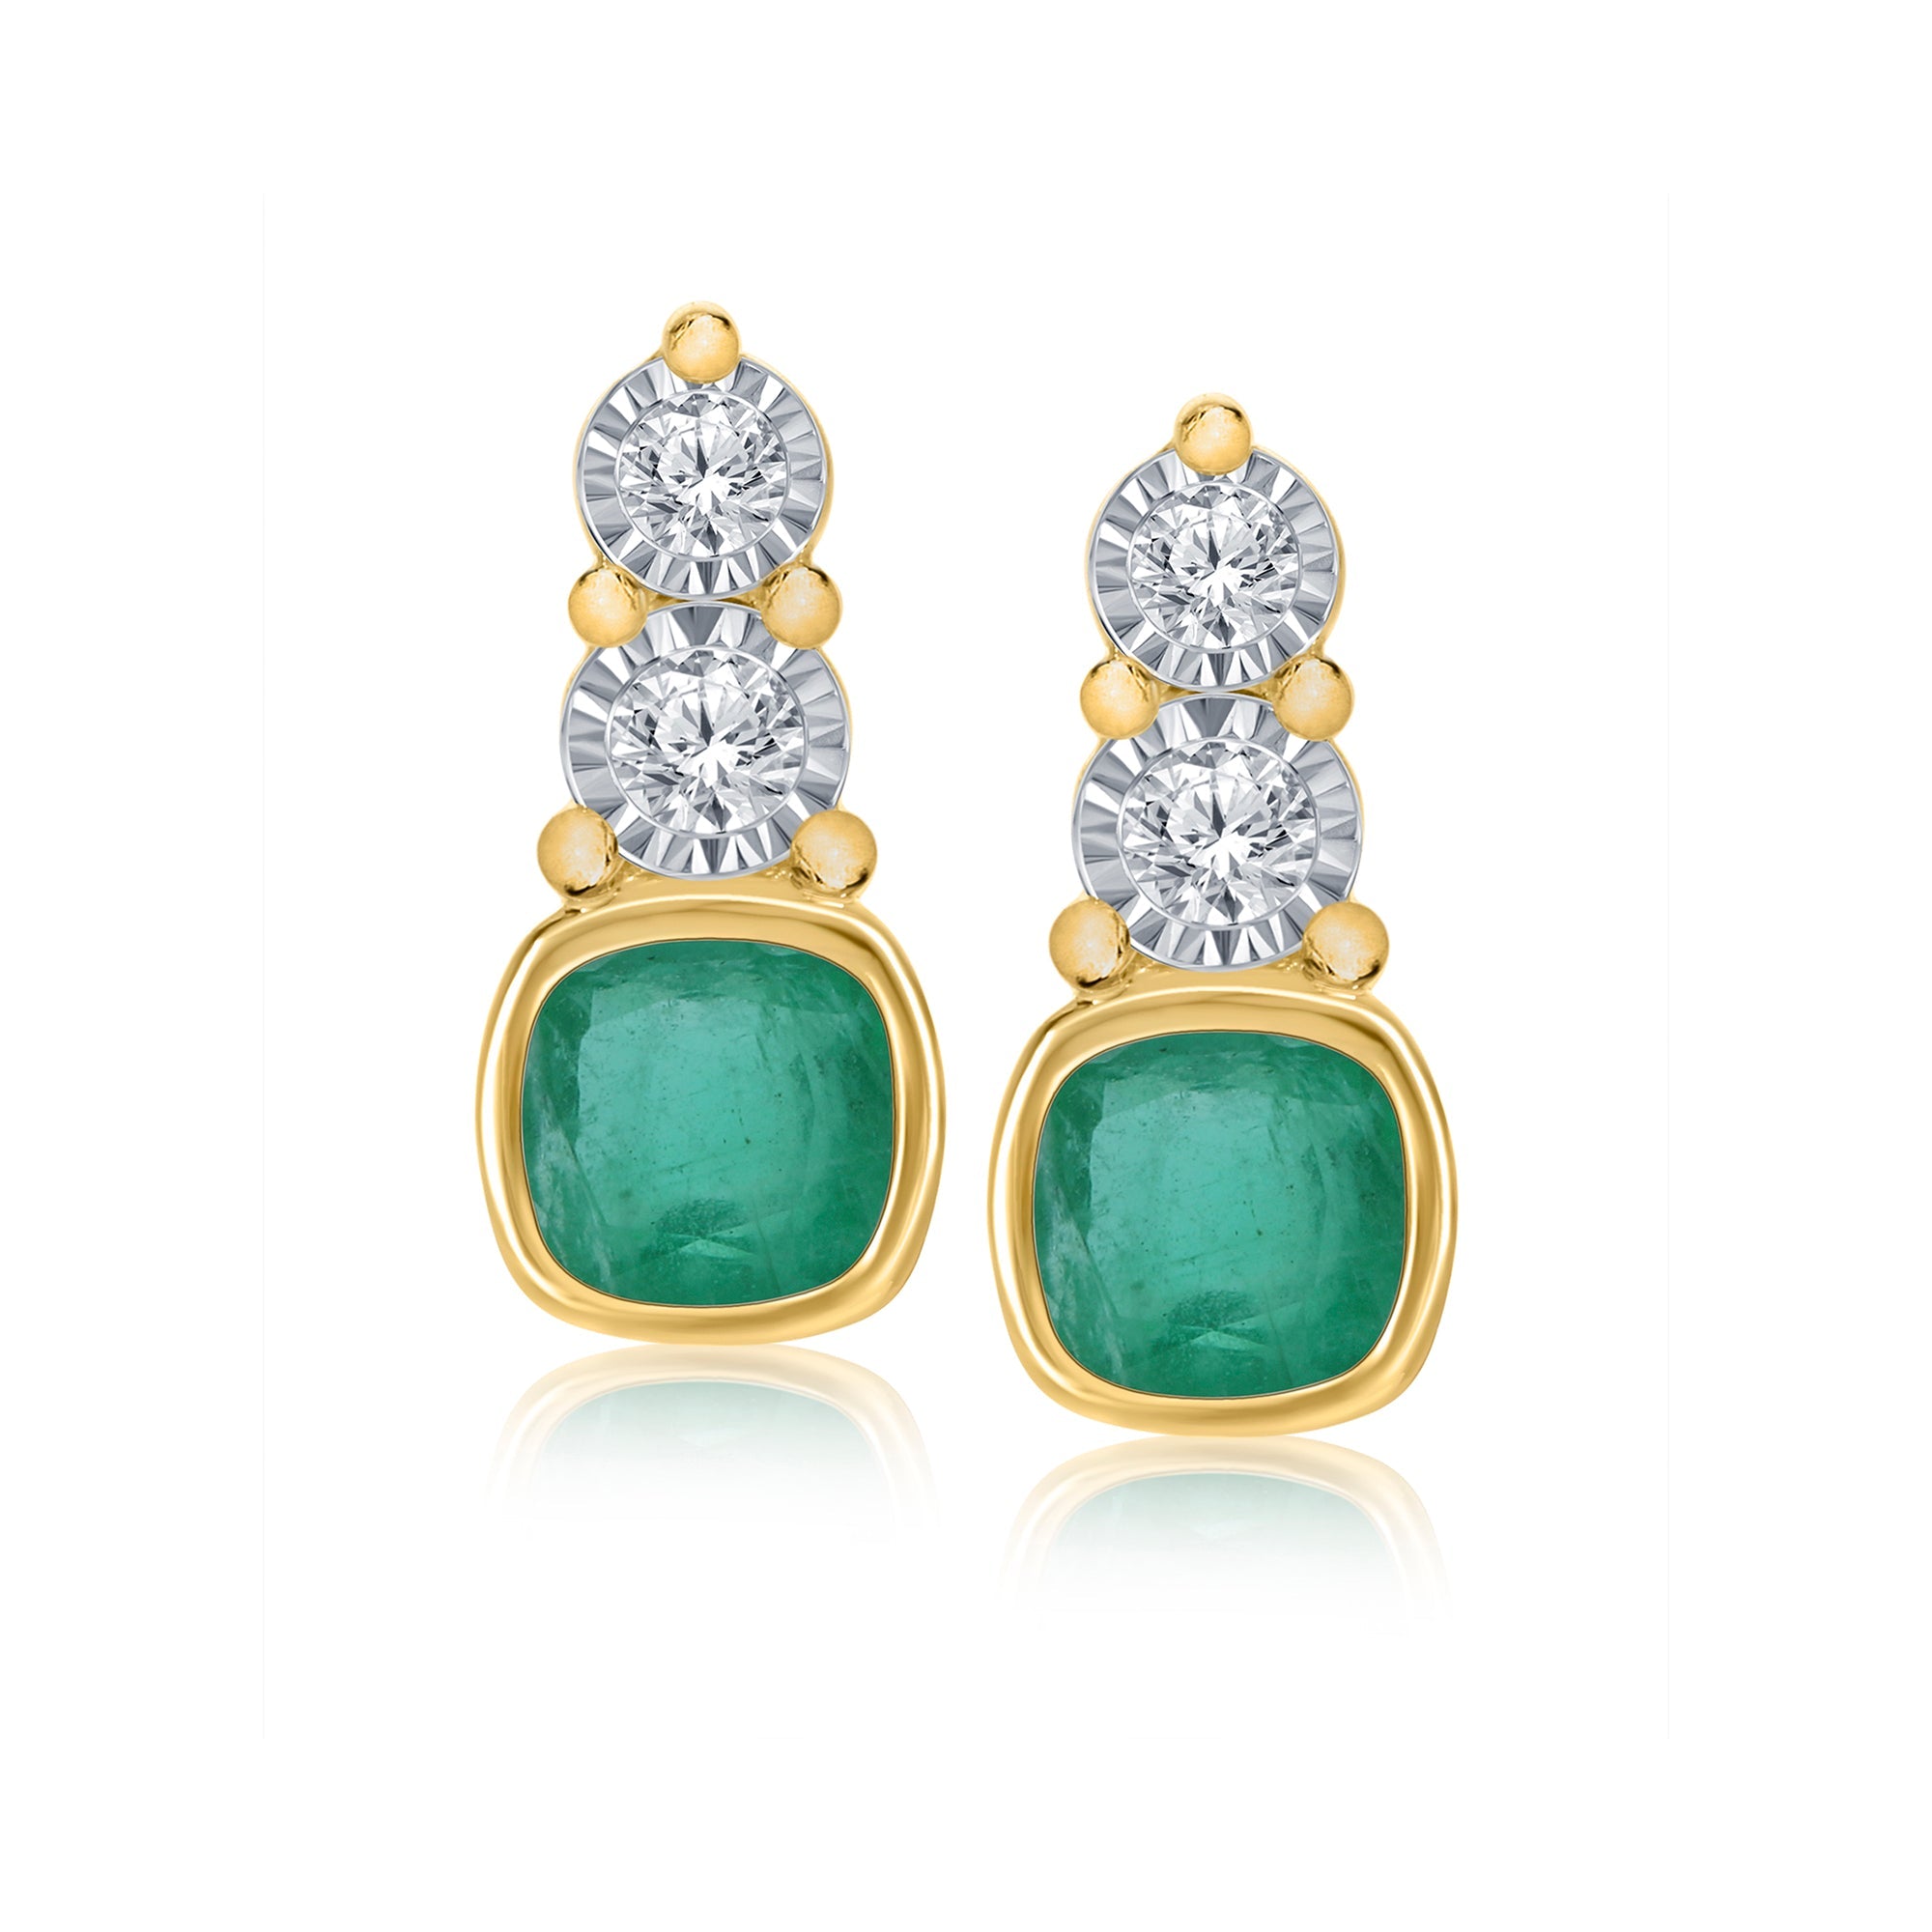 9ct gold 4mm cushion shape emerald & miracle plate diamond studs earrings 0.06ct